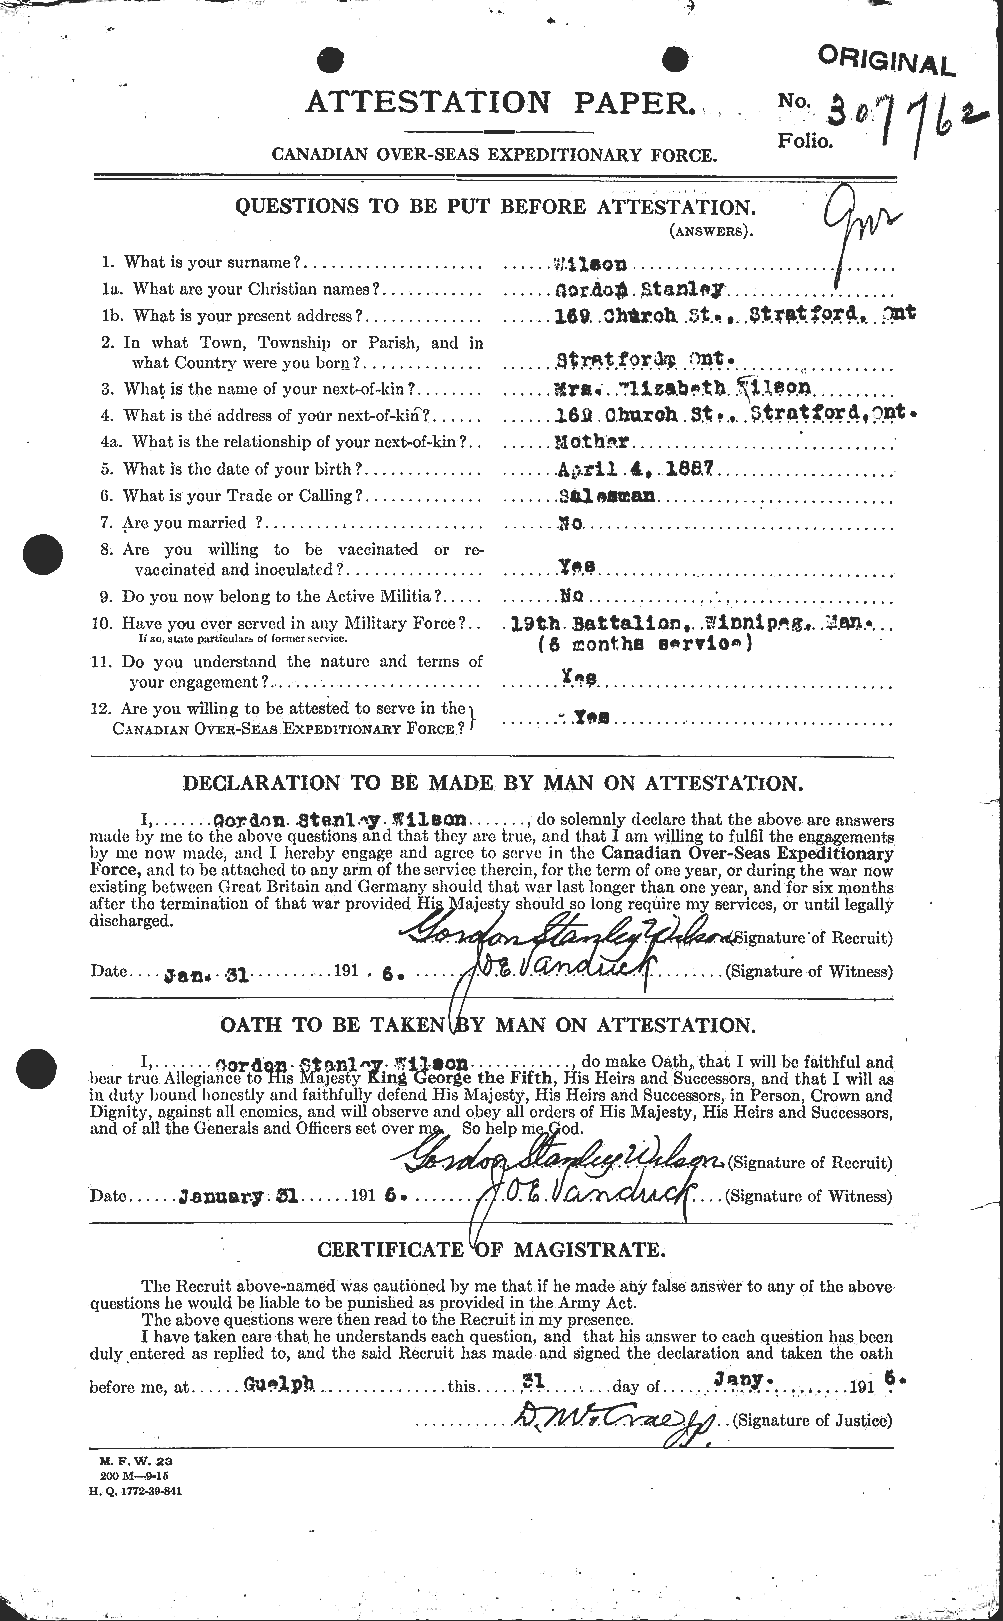 Personnel Records of the First World War - CEF 679379a